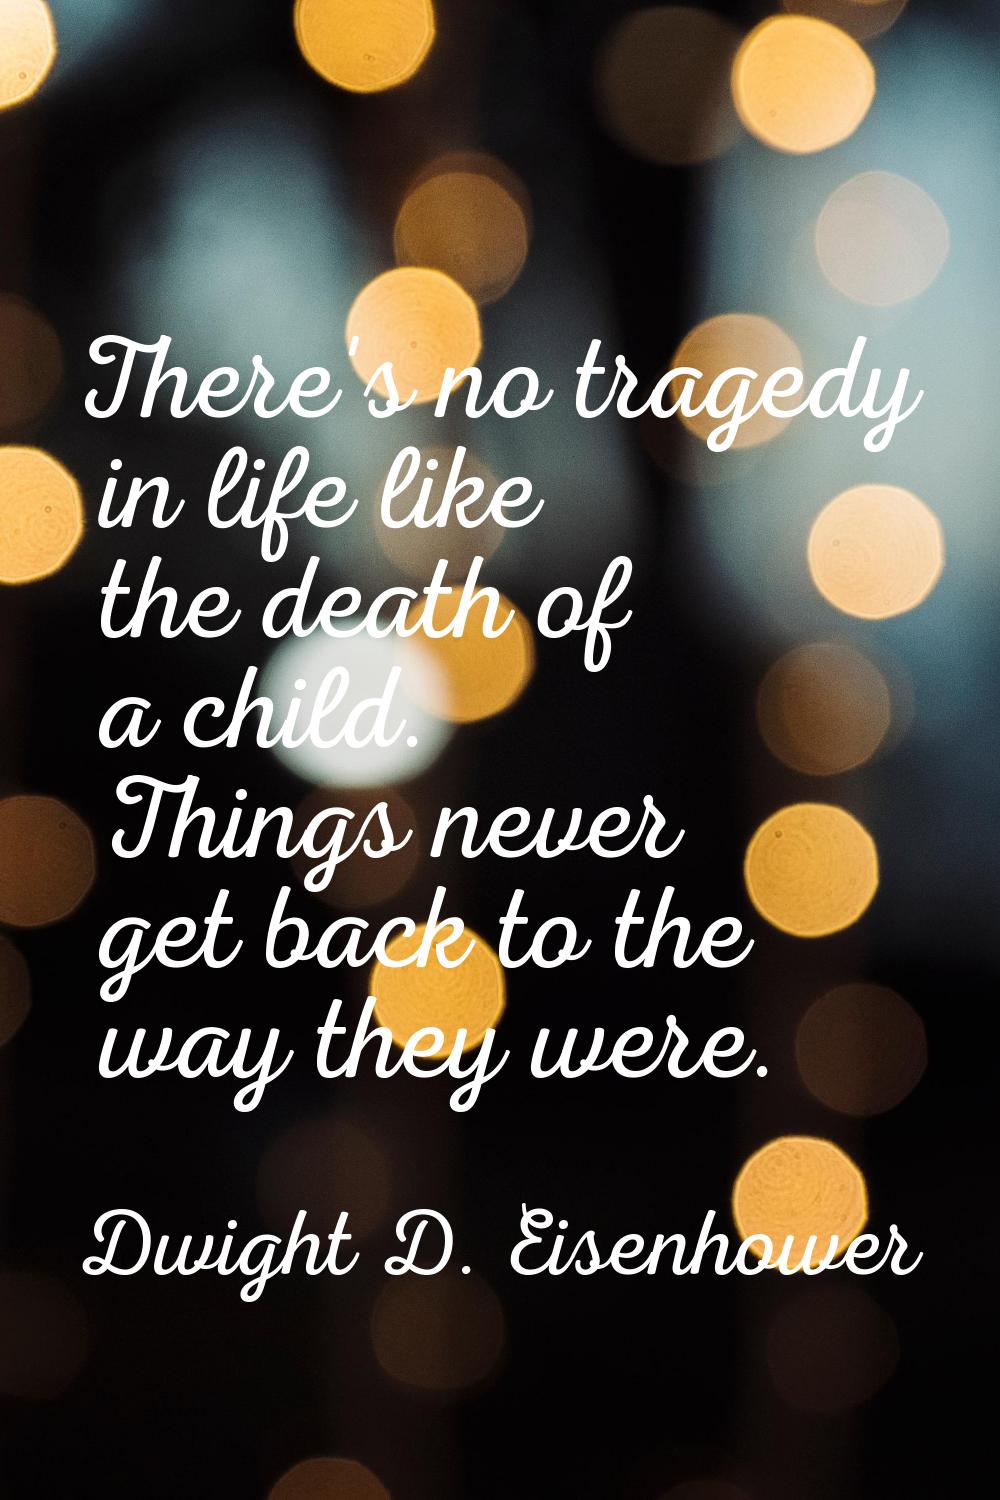 There's no tragedy in life like the death of a child. Things never get back to the way they were.